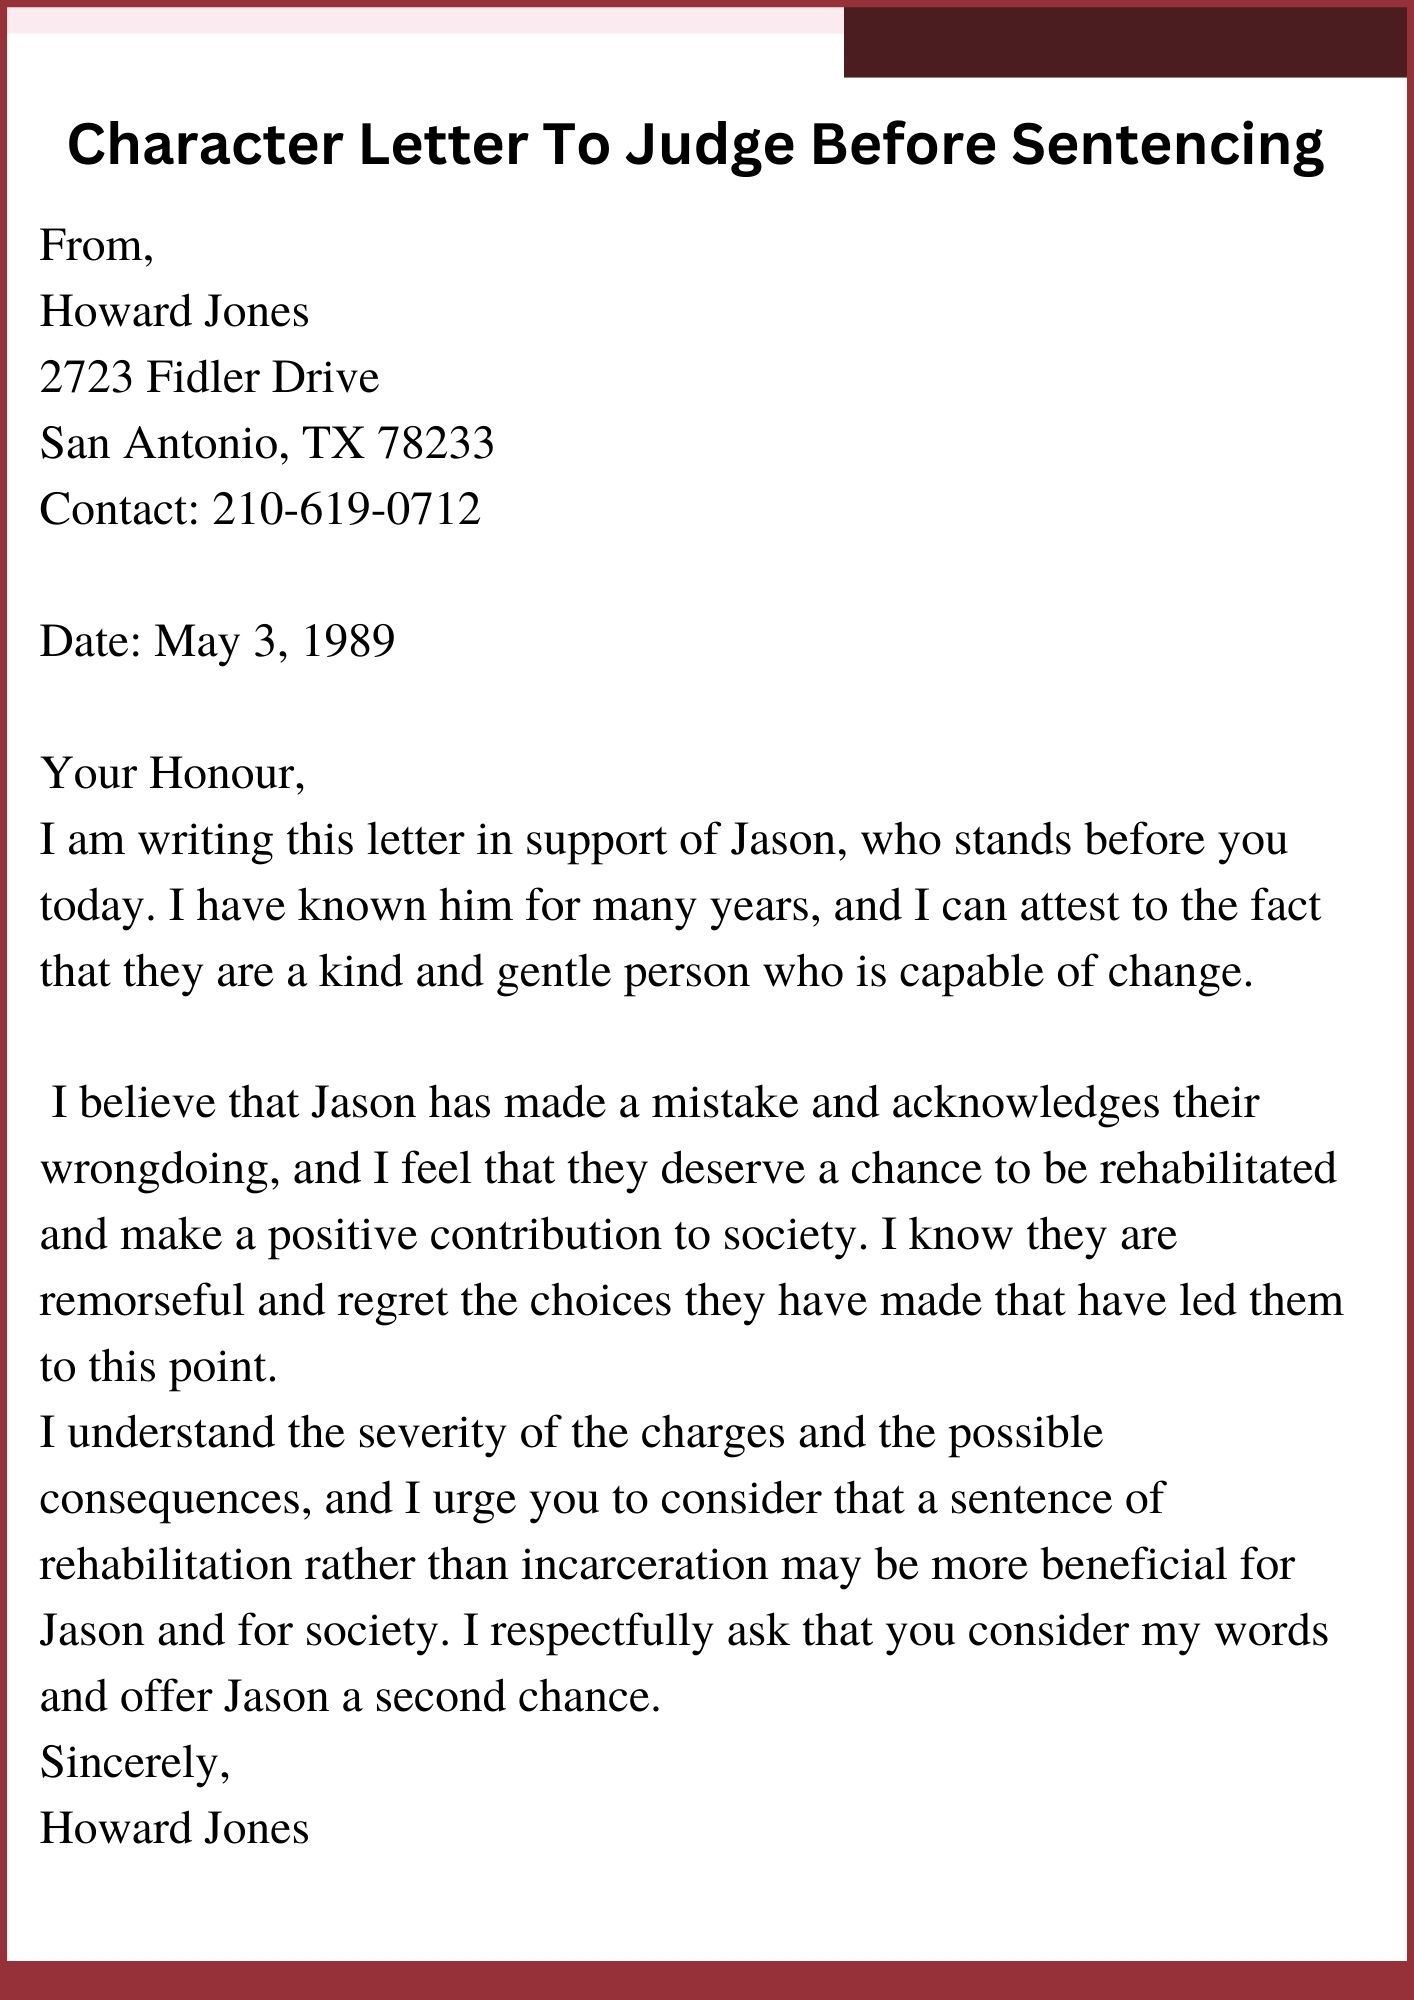 Sample Character Letter To Judge Before Sentencing 